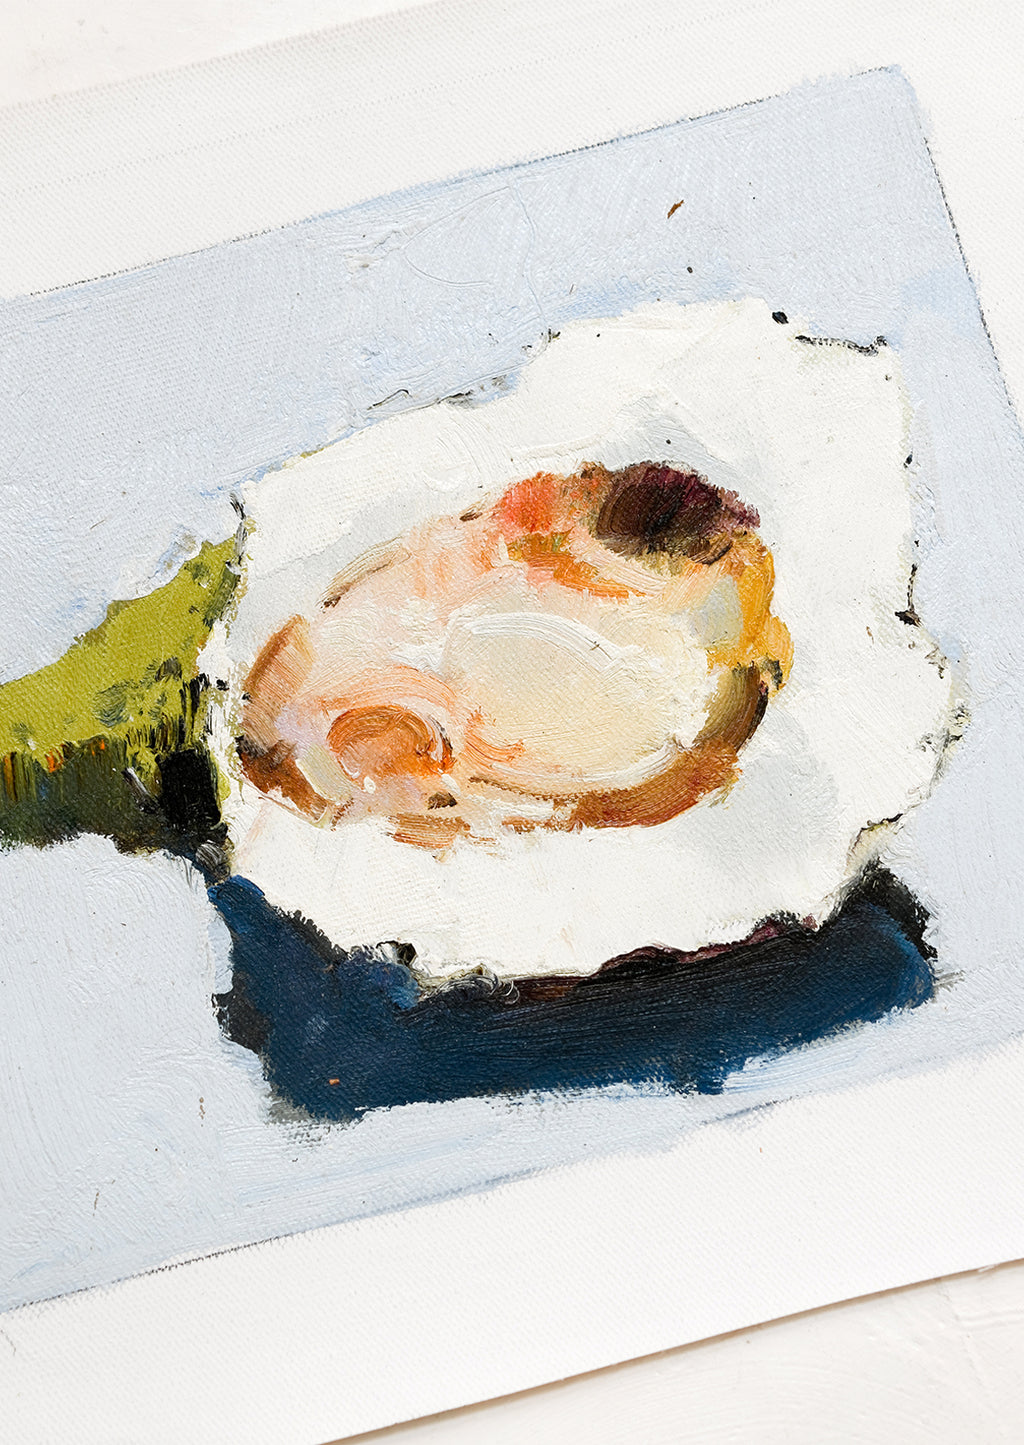 2: An original oil painting of oyster still life on light blue background.